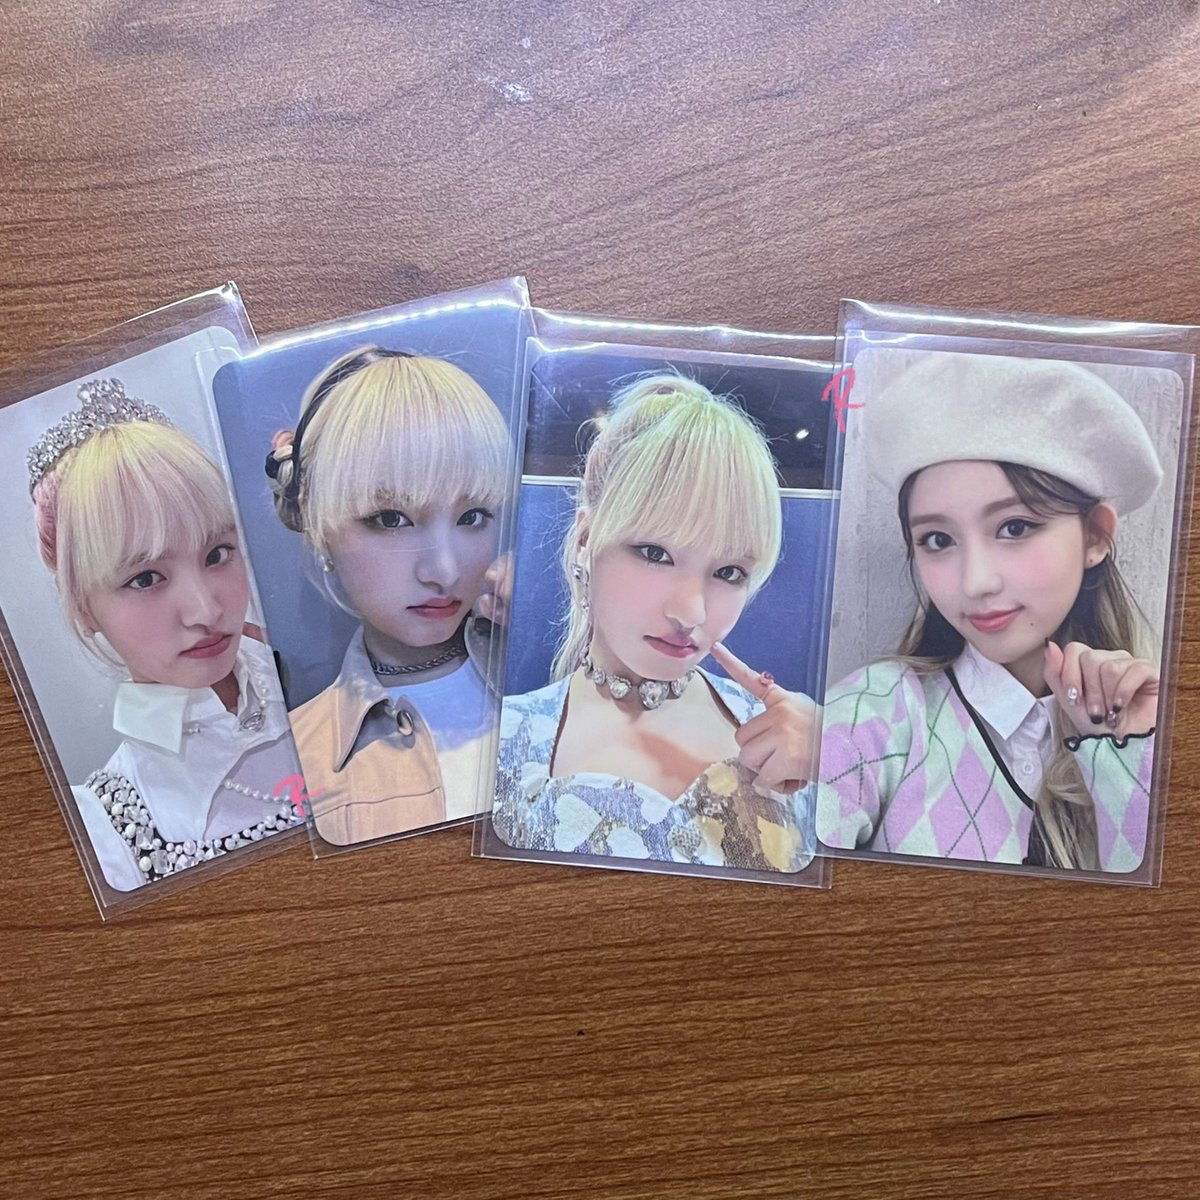 wts lfb ive liz gaeul take all only 5 pc ⤷ IDR 500K ww buyer must have INA address 🌎 overall goodcon but sensi buyer DNI condi video❌ proof photo⭕️ eleven withdrama love dive ktown soundwave beatroad photocard ph jp ch 아이브 포카 양도 #ตลาดนัดive #ตลาดนัดไอบึ #pasarIVE